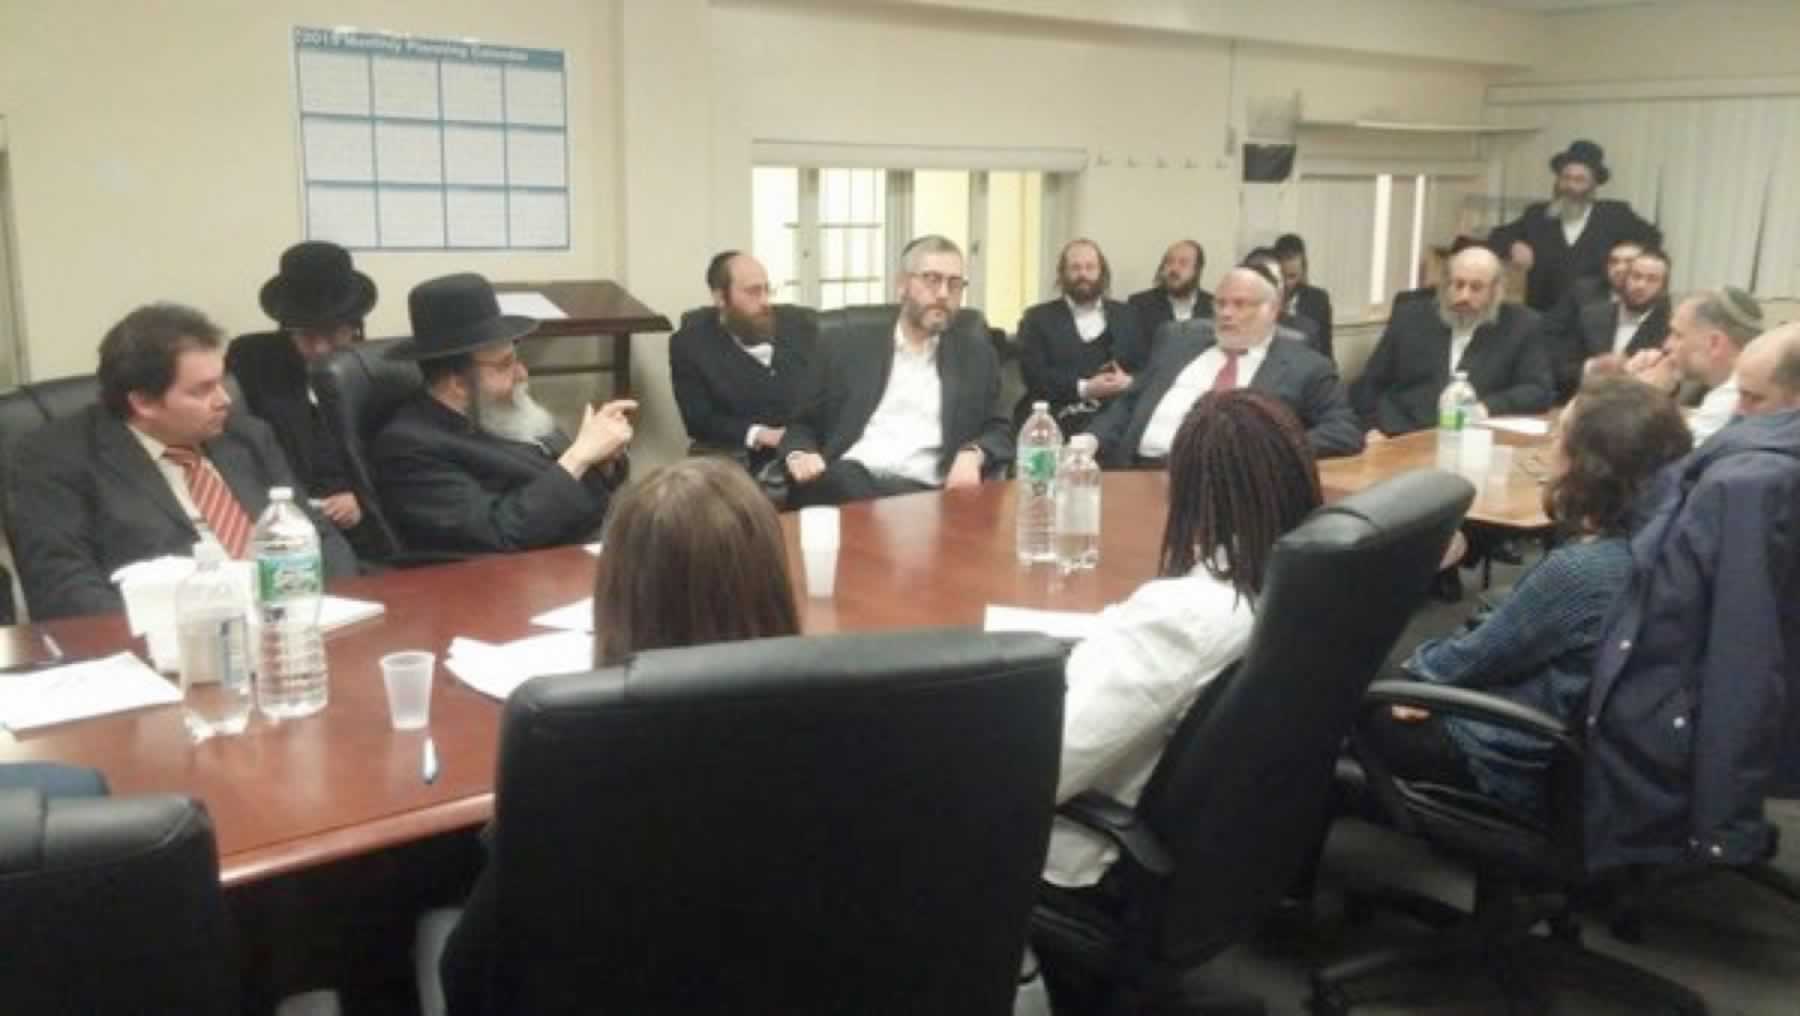 Meeting with the NYC Department of Health to respond to a chicken pox outbreak in Williamsburg.